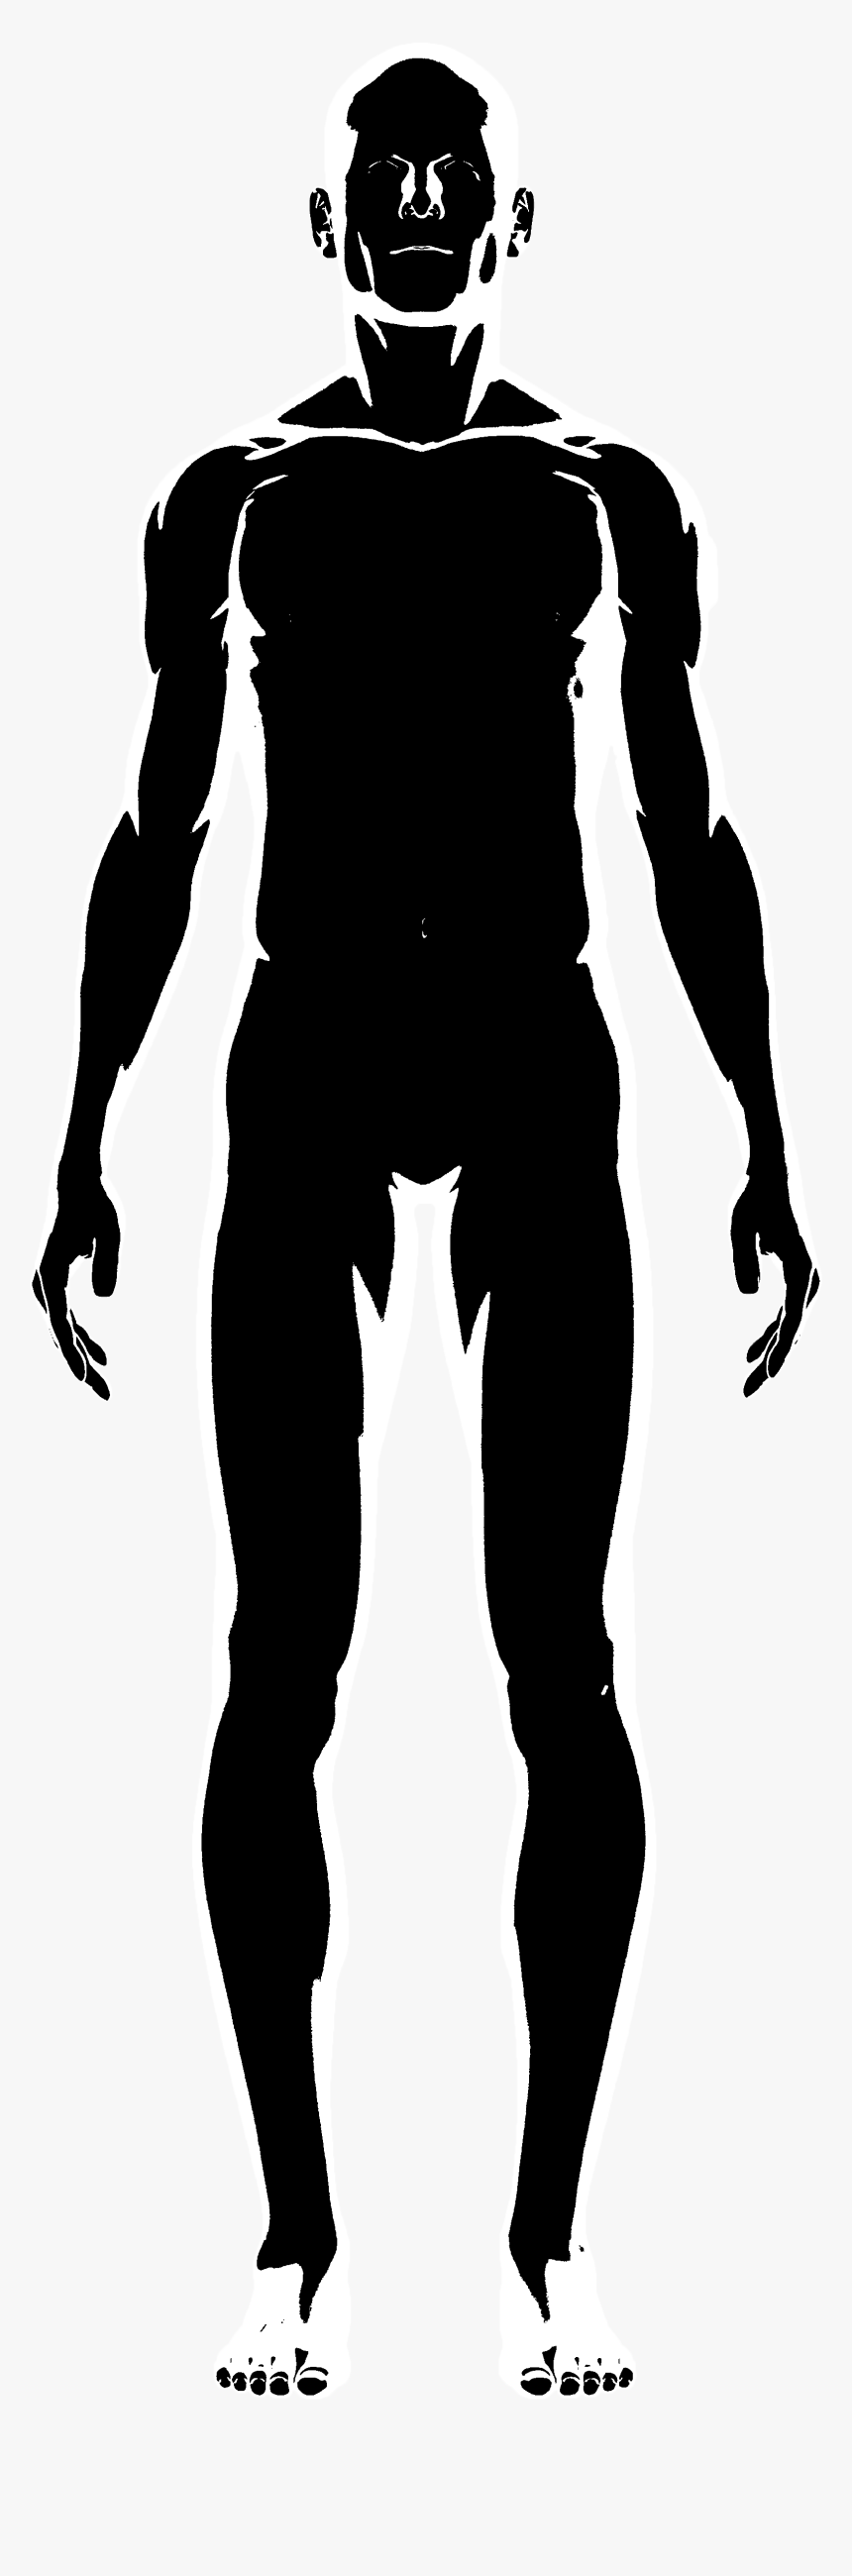 Silhouette Man Vector Graphics Royalty-free Illustration - Vector